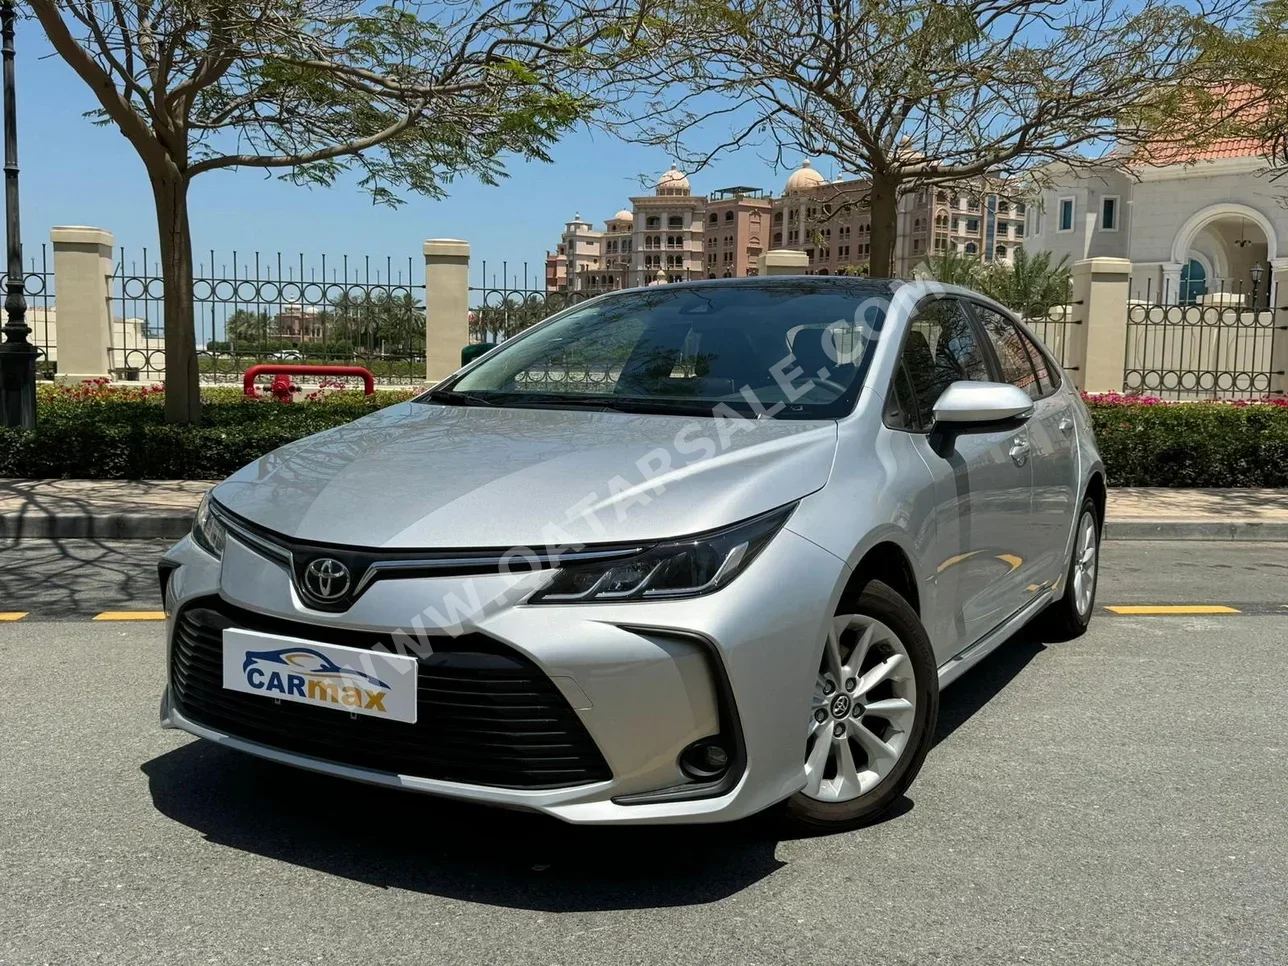 Toyota  Corolla  2022  Automatic  1,000 Km  4 Cylinder  Front Wheel Drive (FWD)  Sedan  Silver  With Warranty